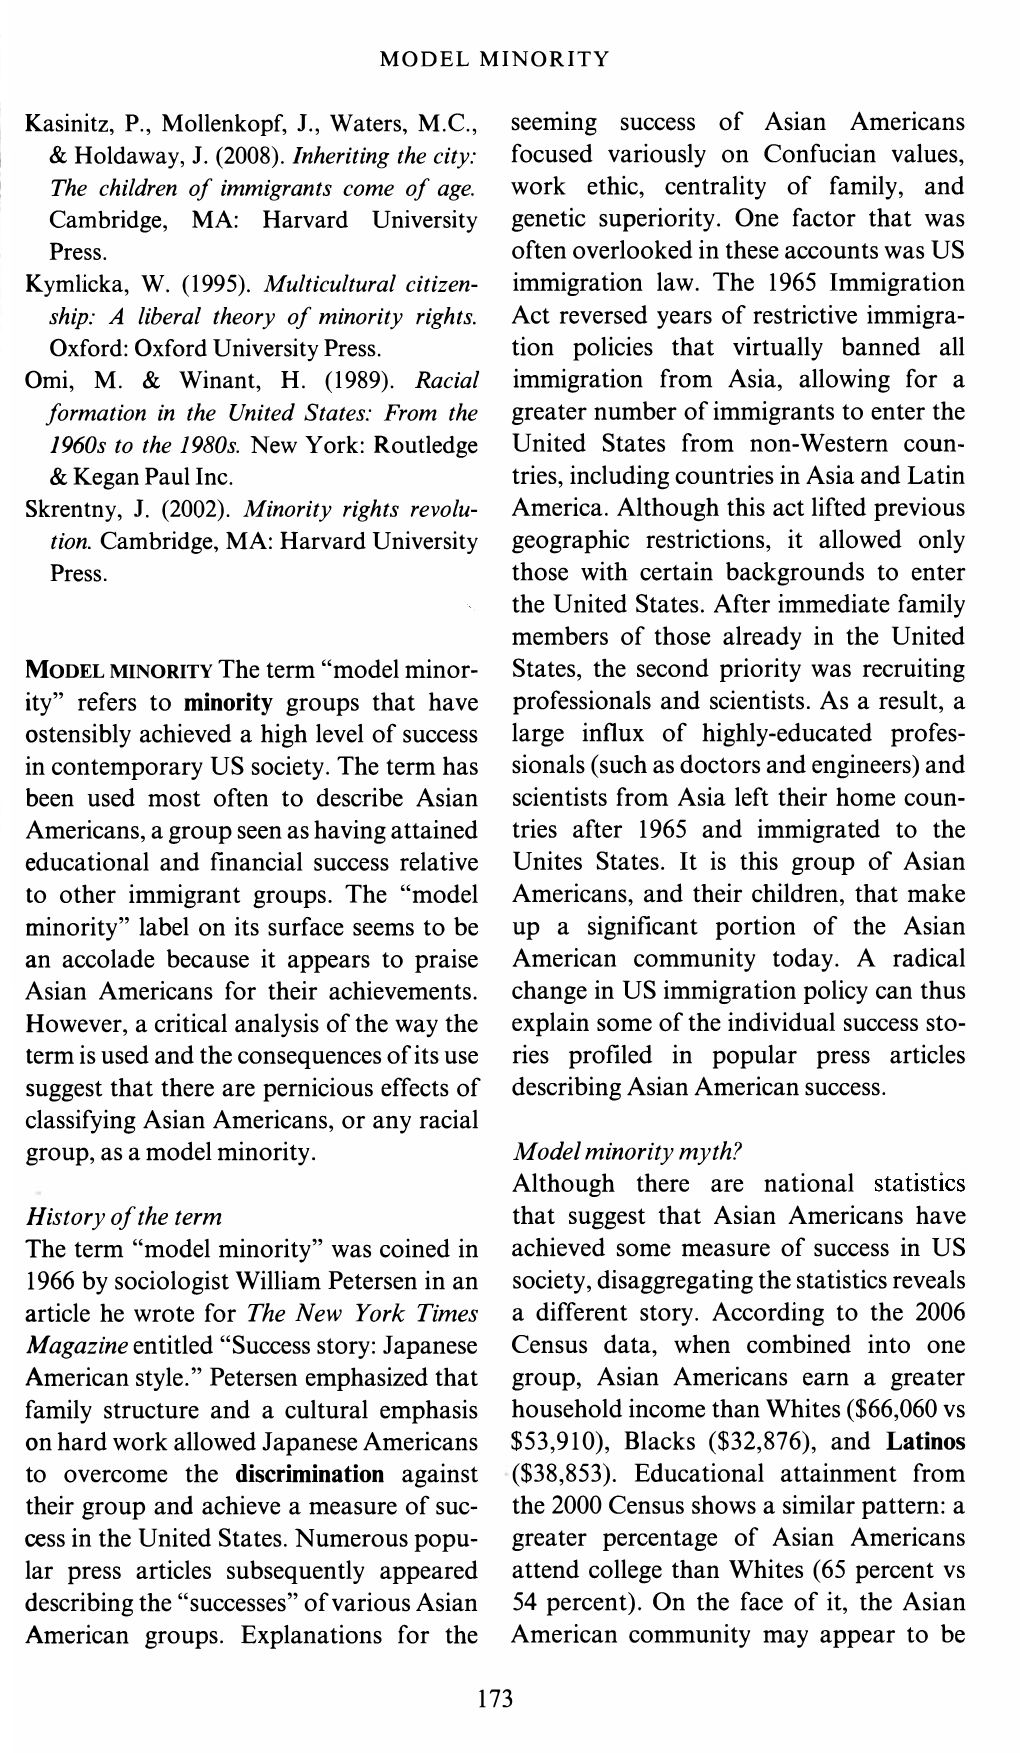 History of the Term the New York Times Model Minority Myth? 2006